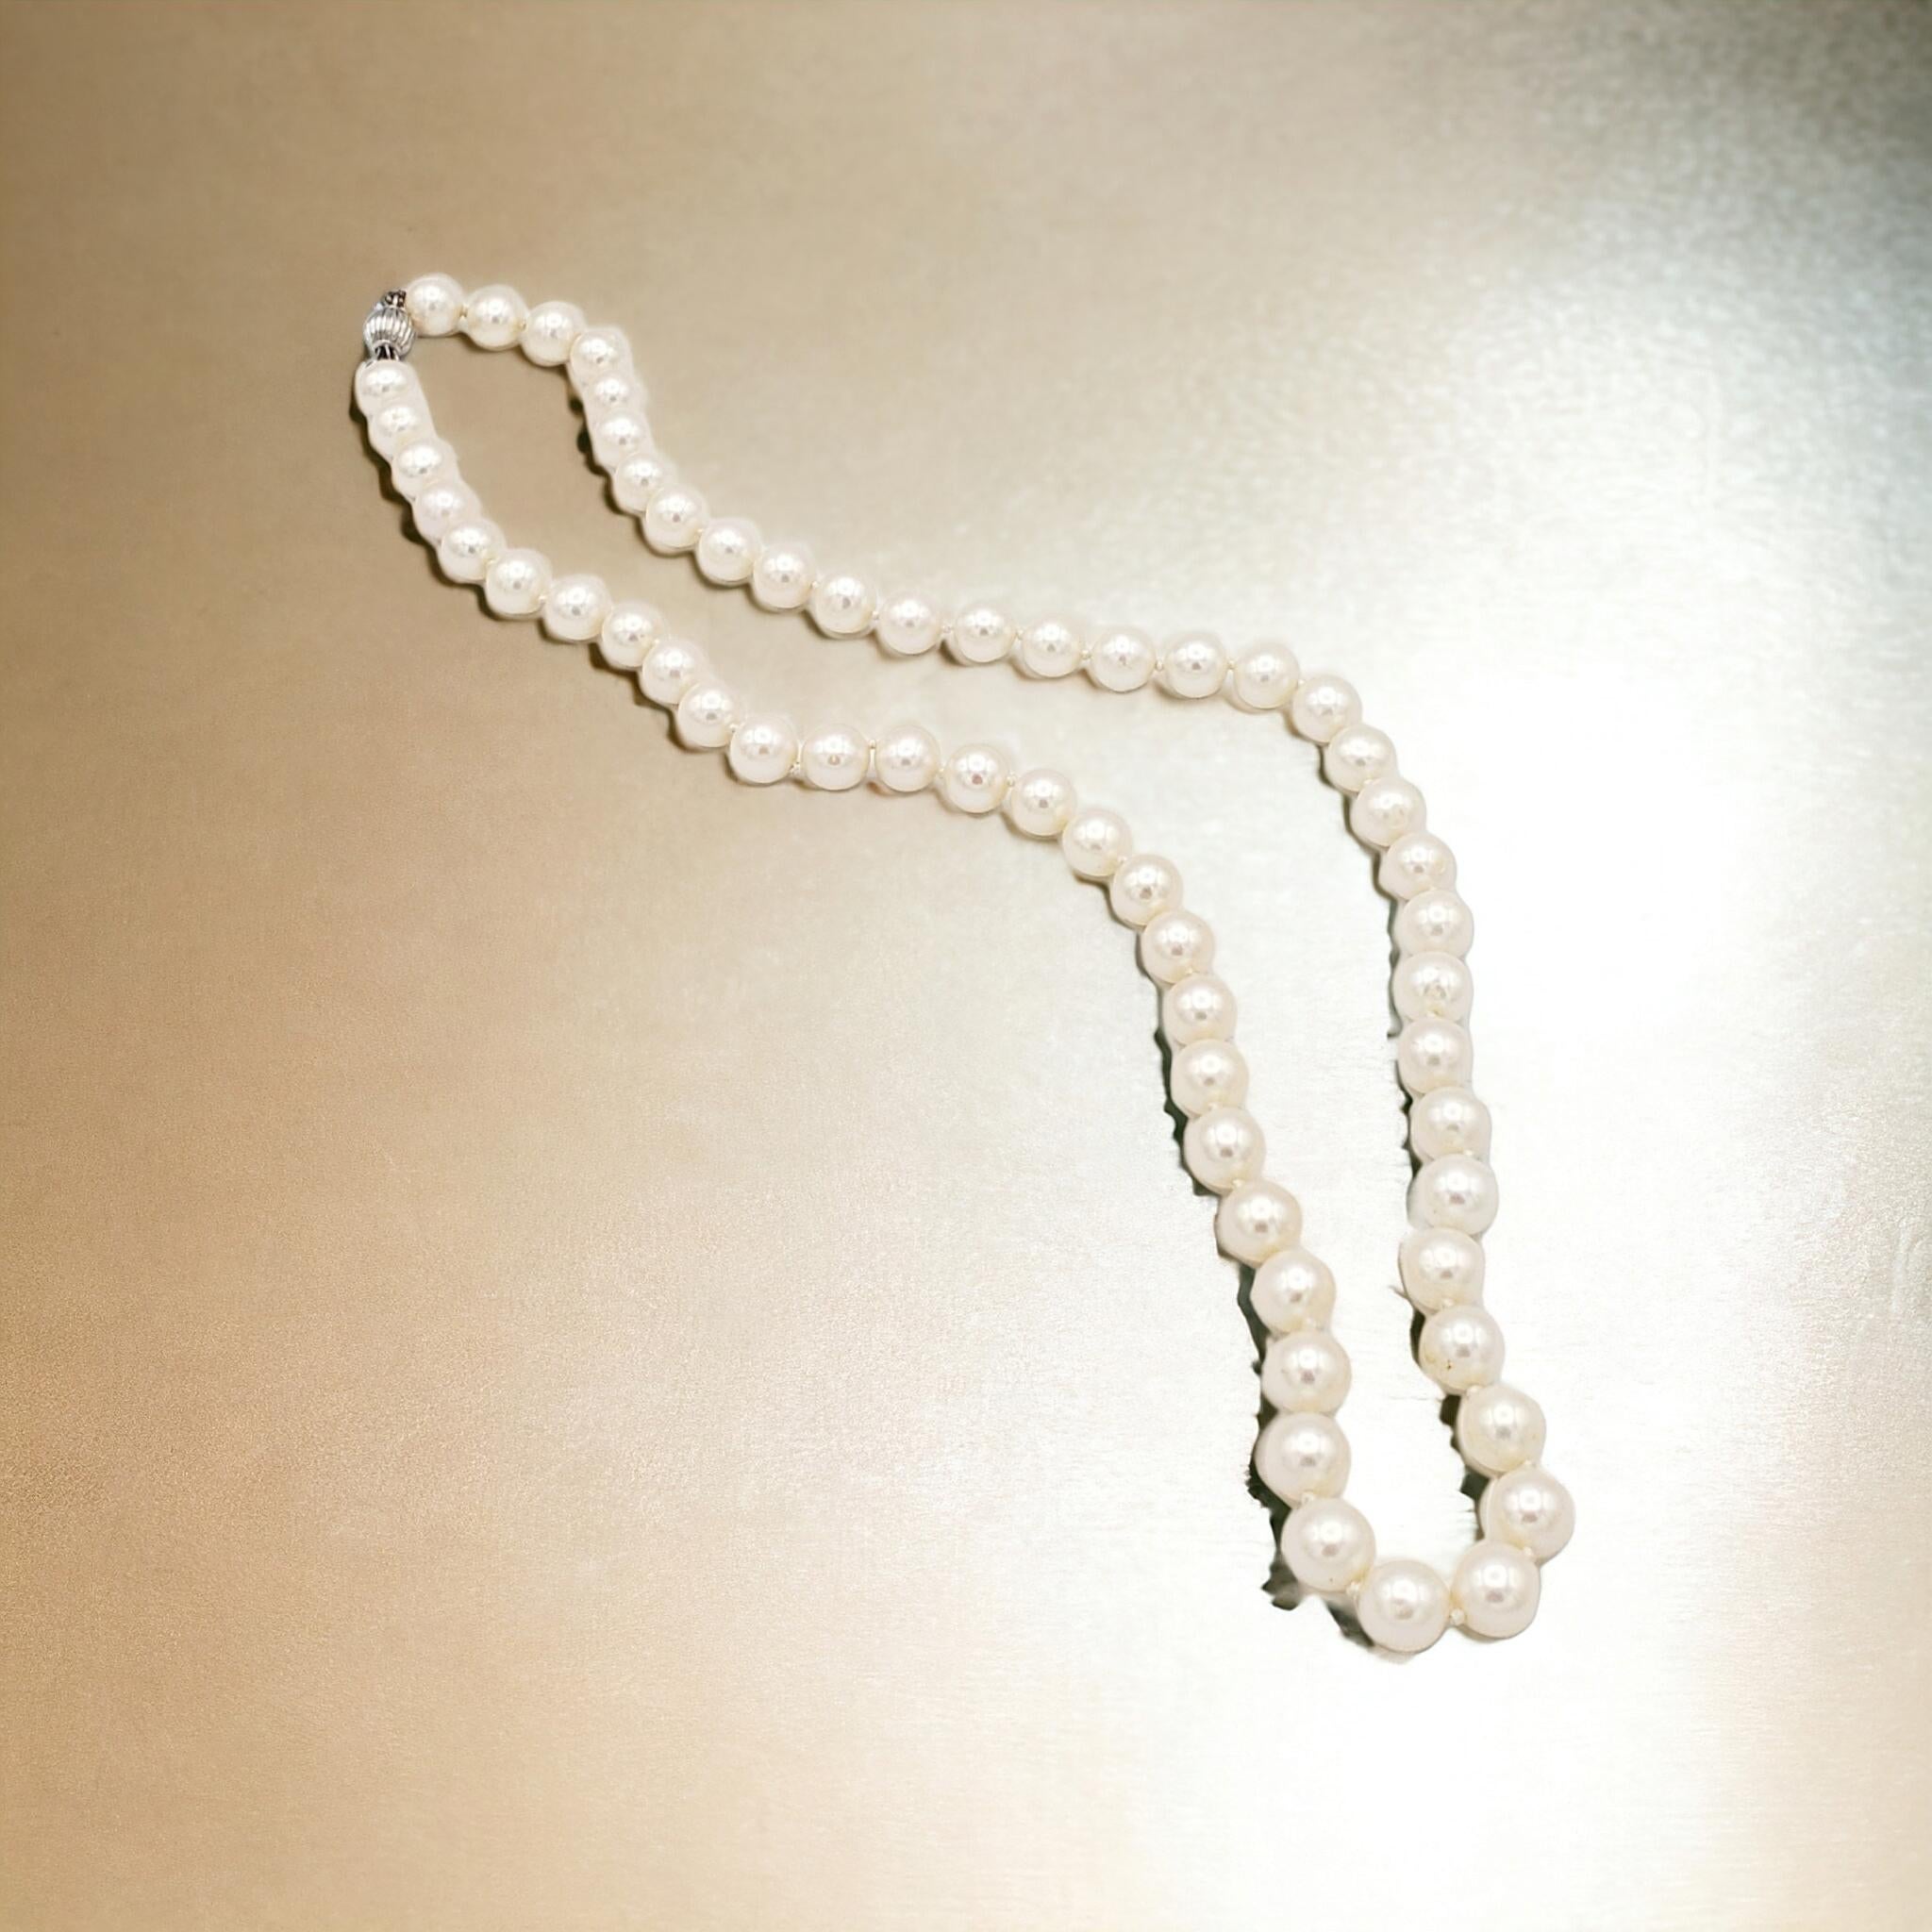 NEW Certified AA+ Quality Japanese Akoya Salt Water White Pearl Necklace For Sale 7